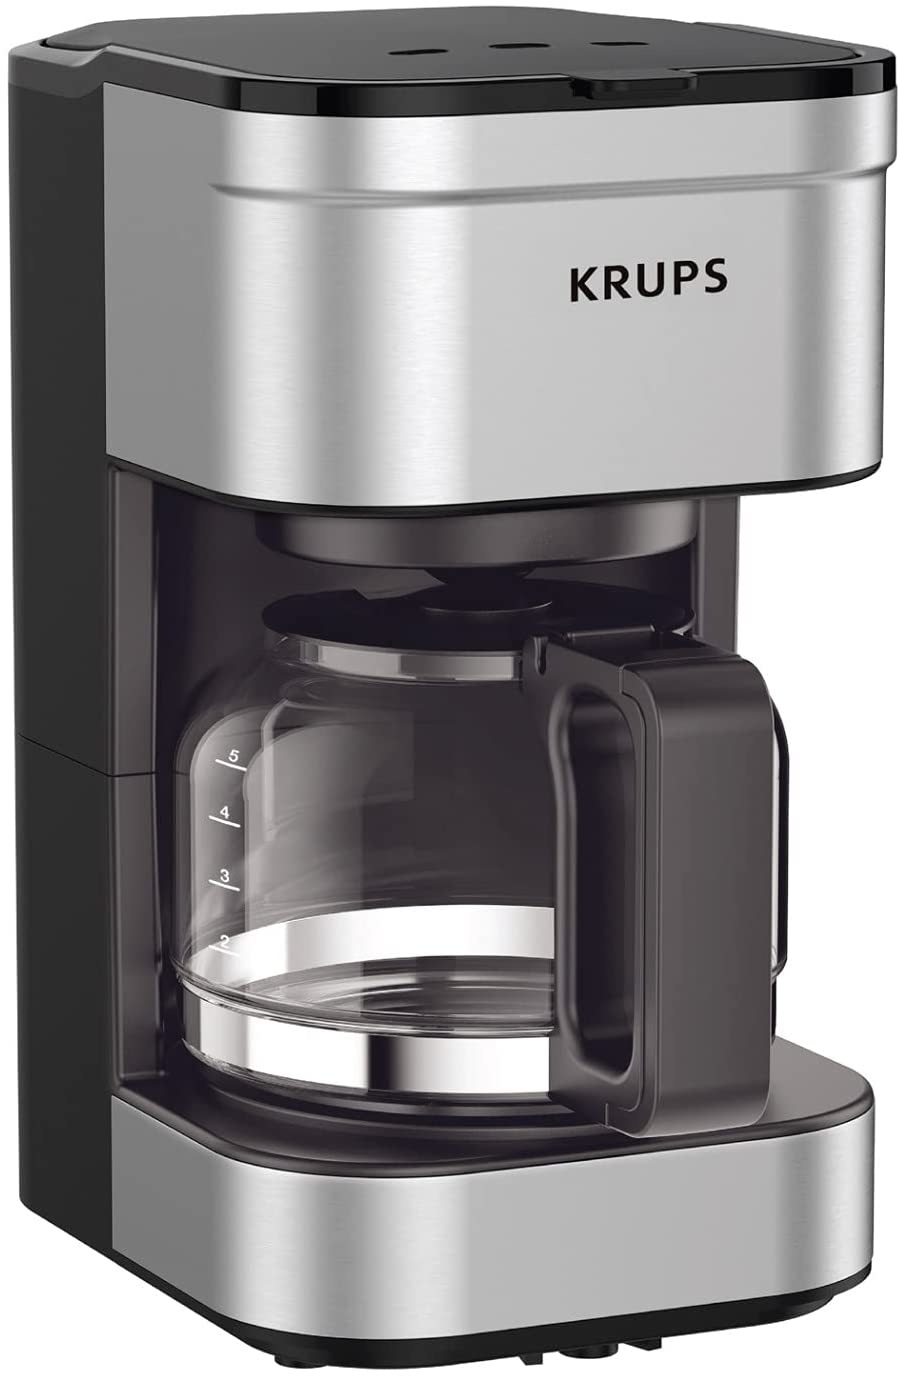 Krups Simply Brew Compact Coffee Maker